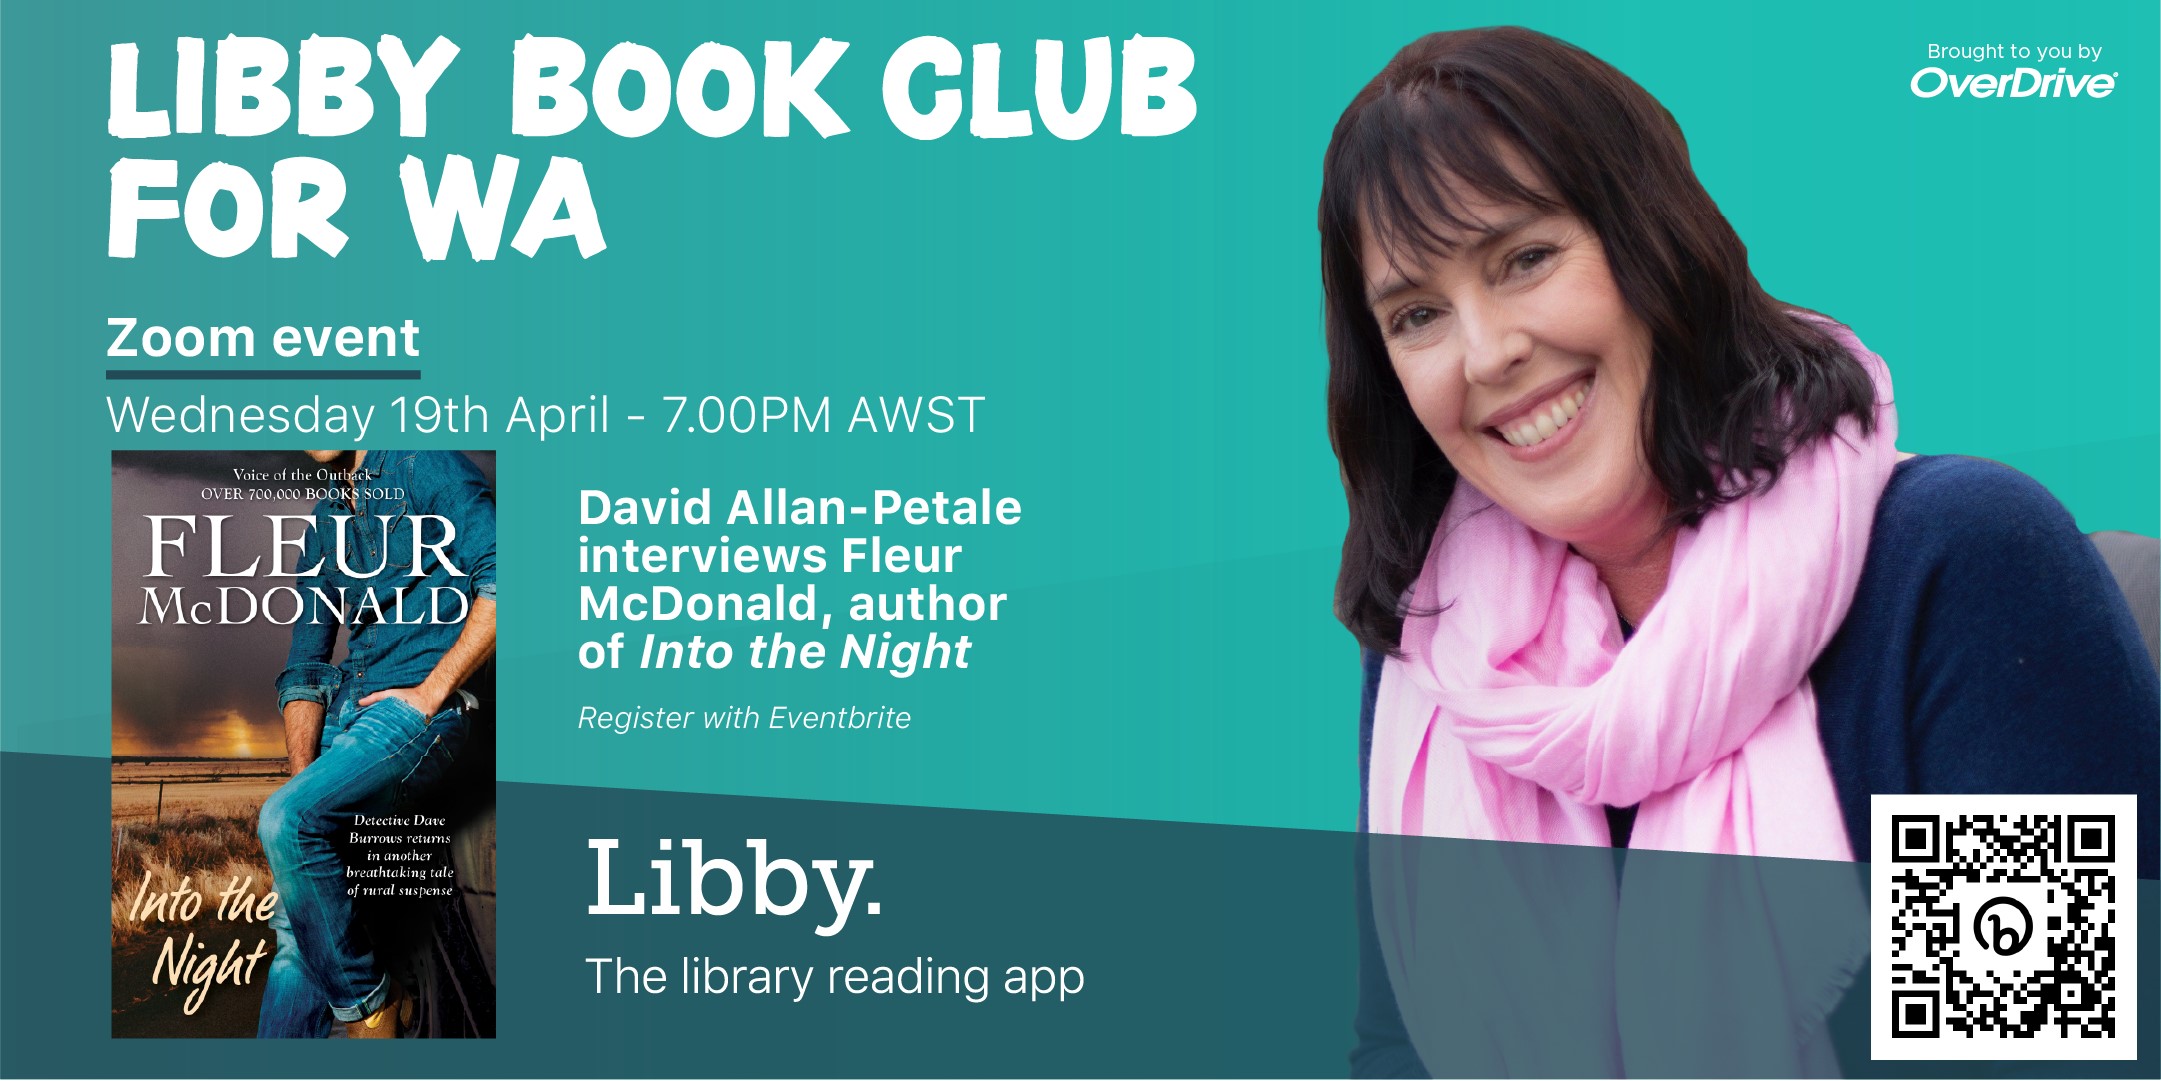 Digital ad for Libby Book Club for WA featuring ‘Into the Night’ by Fleur McDonald